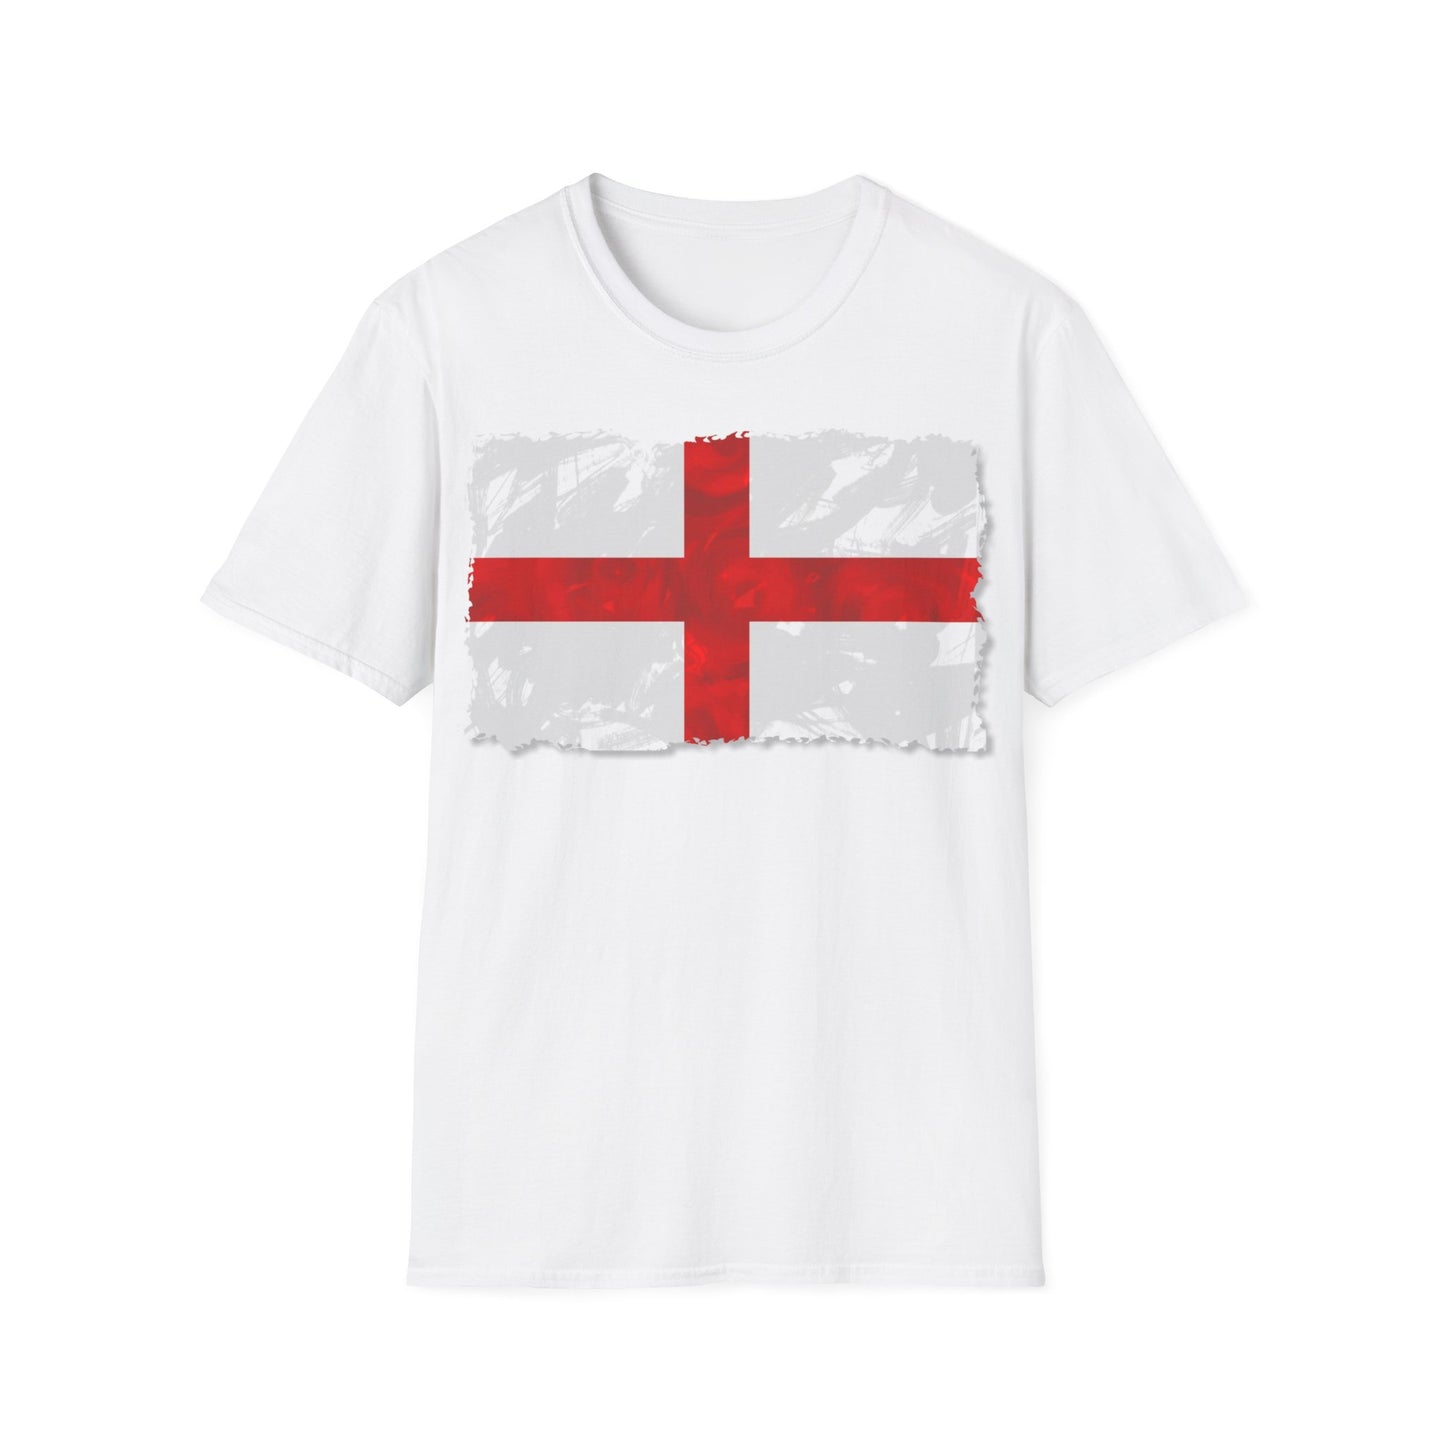 A white t-shirt with a painting of the England flag. The painting is a grunge design. The flag is also known as the flag of Saint George